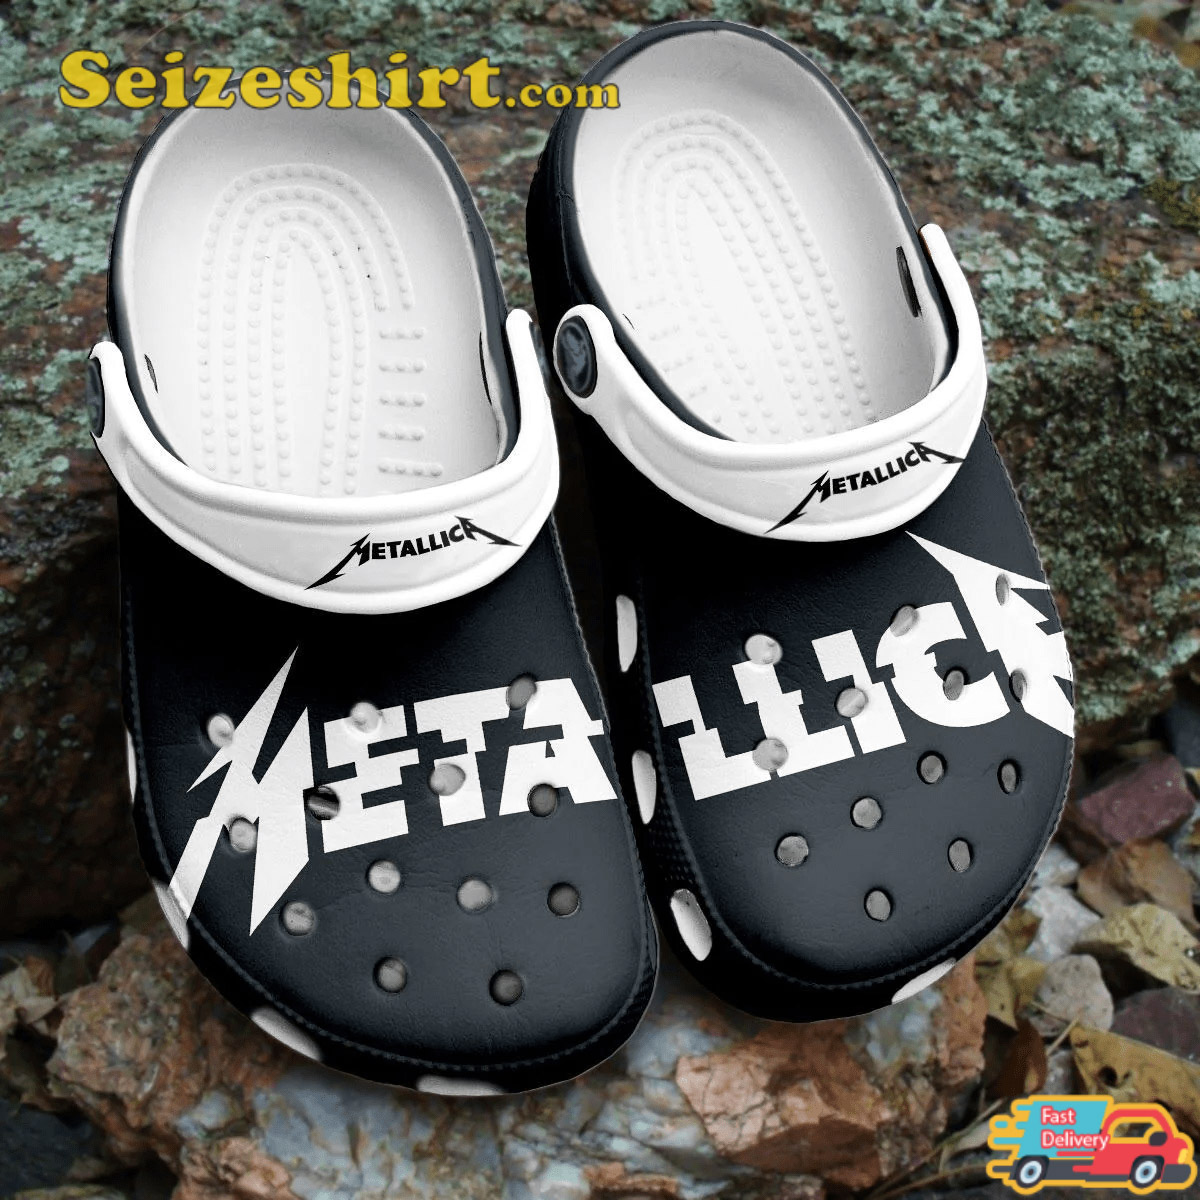 Metallica crocs is exactly what you are looking for your outfit on M72 World Tour of Metallica band. Grab yours today! seizeshirt.com/metallica-heav… Visit Seizeshirt.com to explore more Metallica Merch. #crocs #metallica #footwear #rockmusic